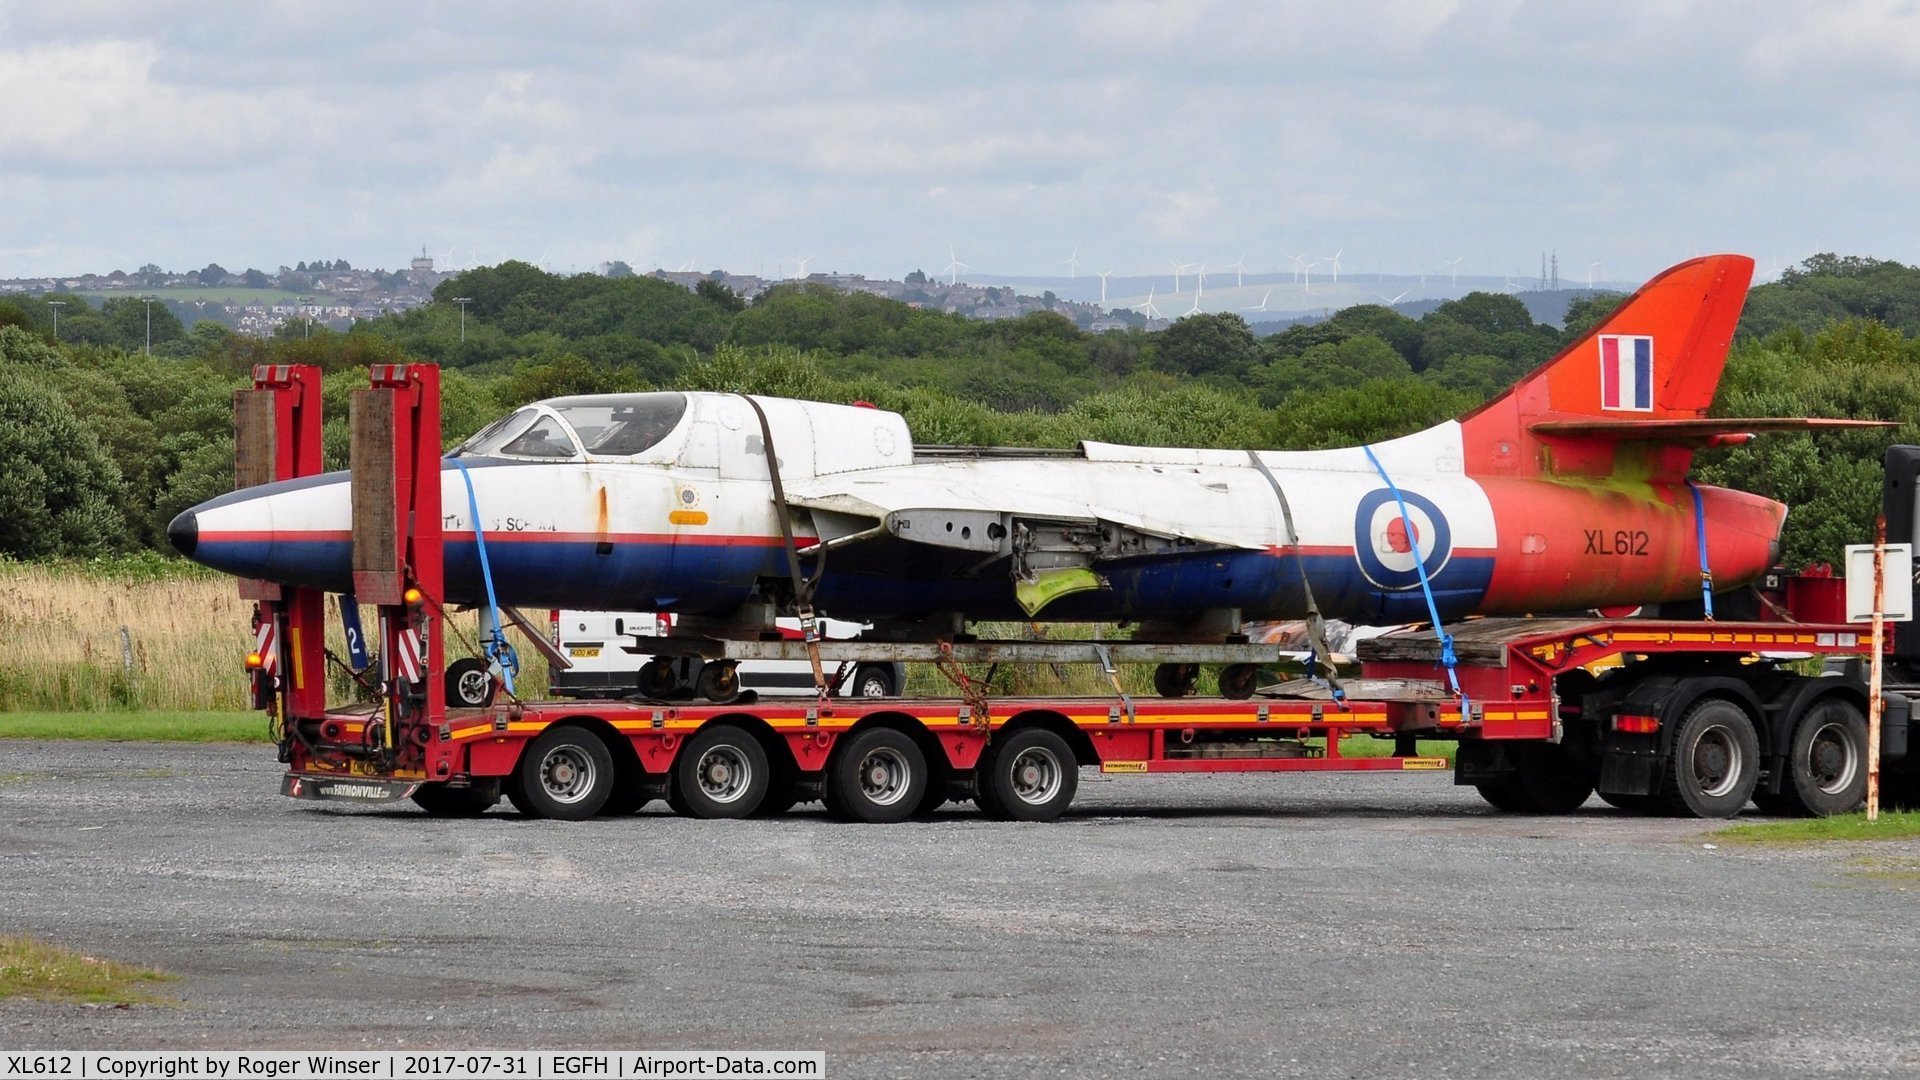 XL612, 1958 Hawker Hunter T.7 C/N 41H-695346, The fuselage of ex-RAF/ex-ETPS Hunter T.7 aircraft being moved from Swansea Airport to MOD Saint Athan after being a gate guardian at the airport since 8th January 2012.